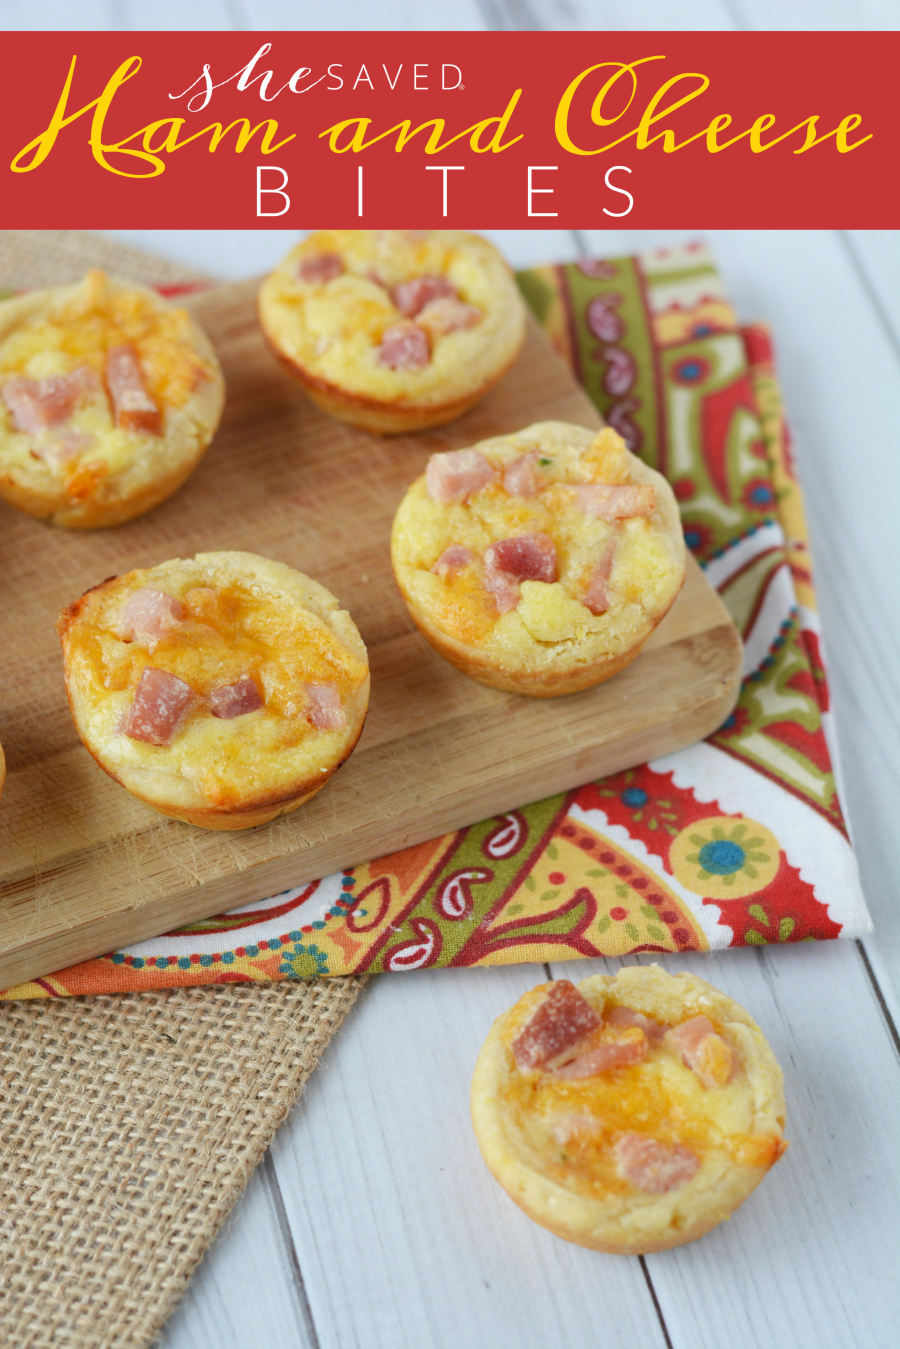 EASY and so yummy, this Ham and Cheese Bites recipe is perfect for your family breakfast!